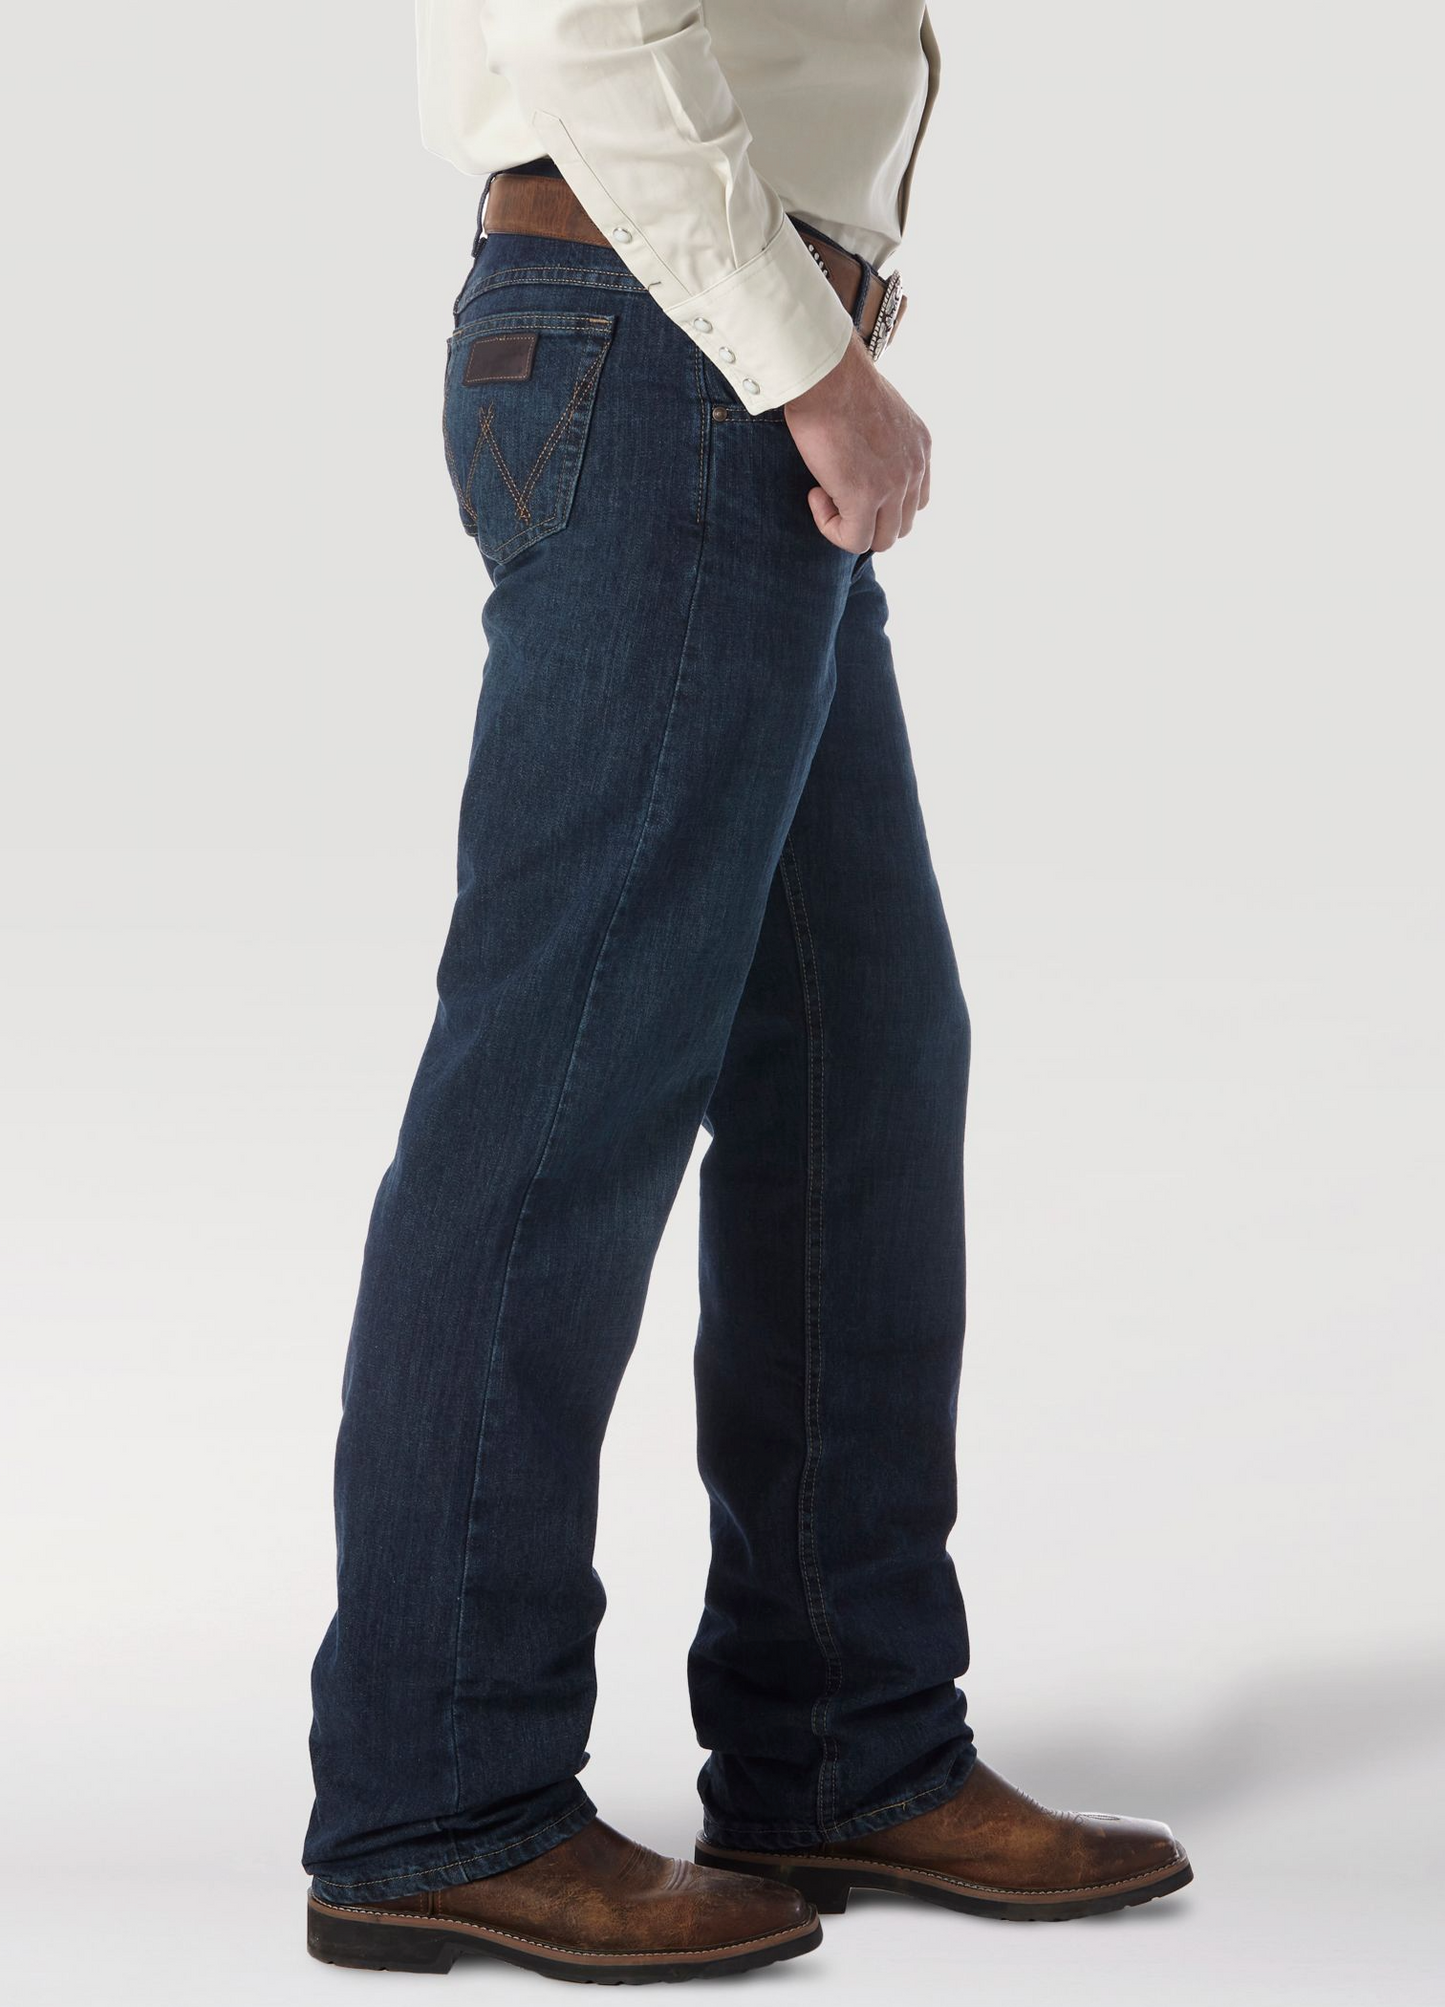 WRANGLER 20X 01 COMPETITION JEAN IN DEEPBLUE